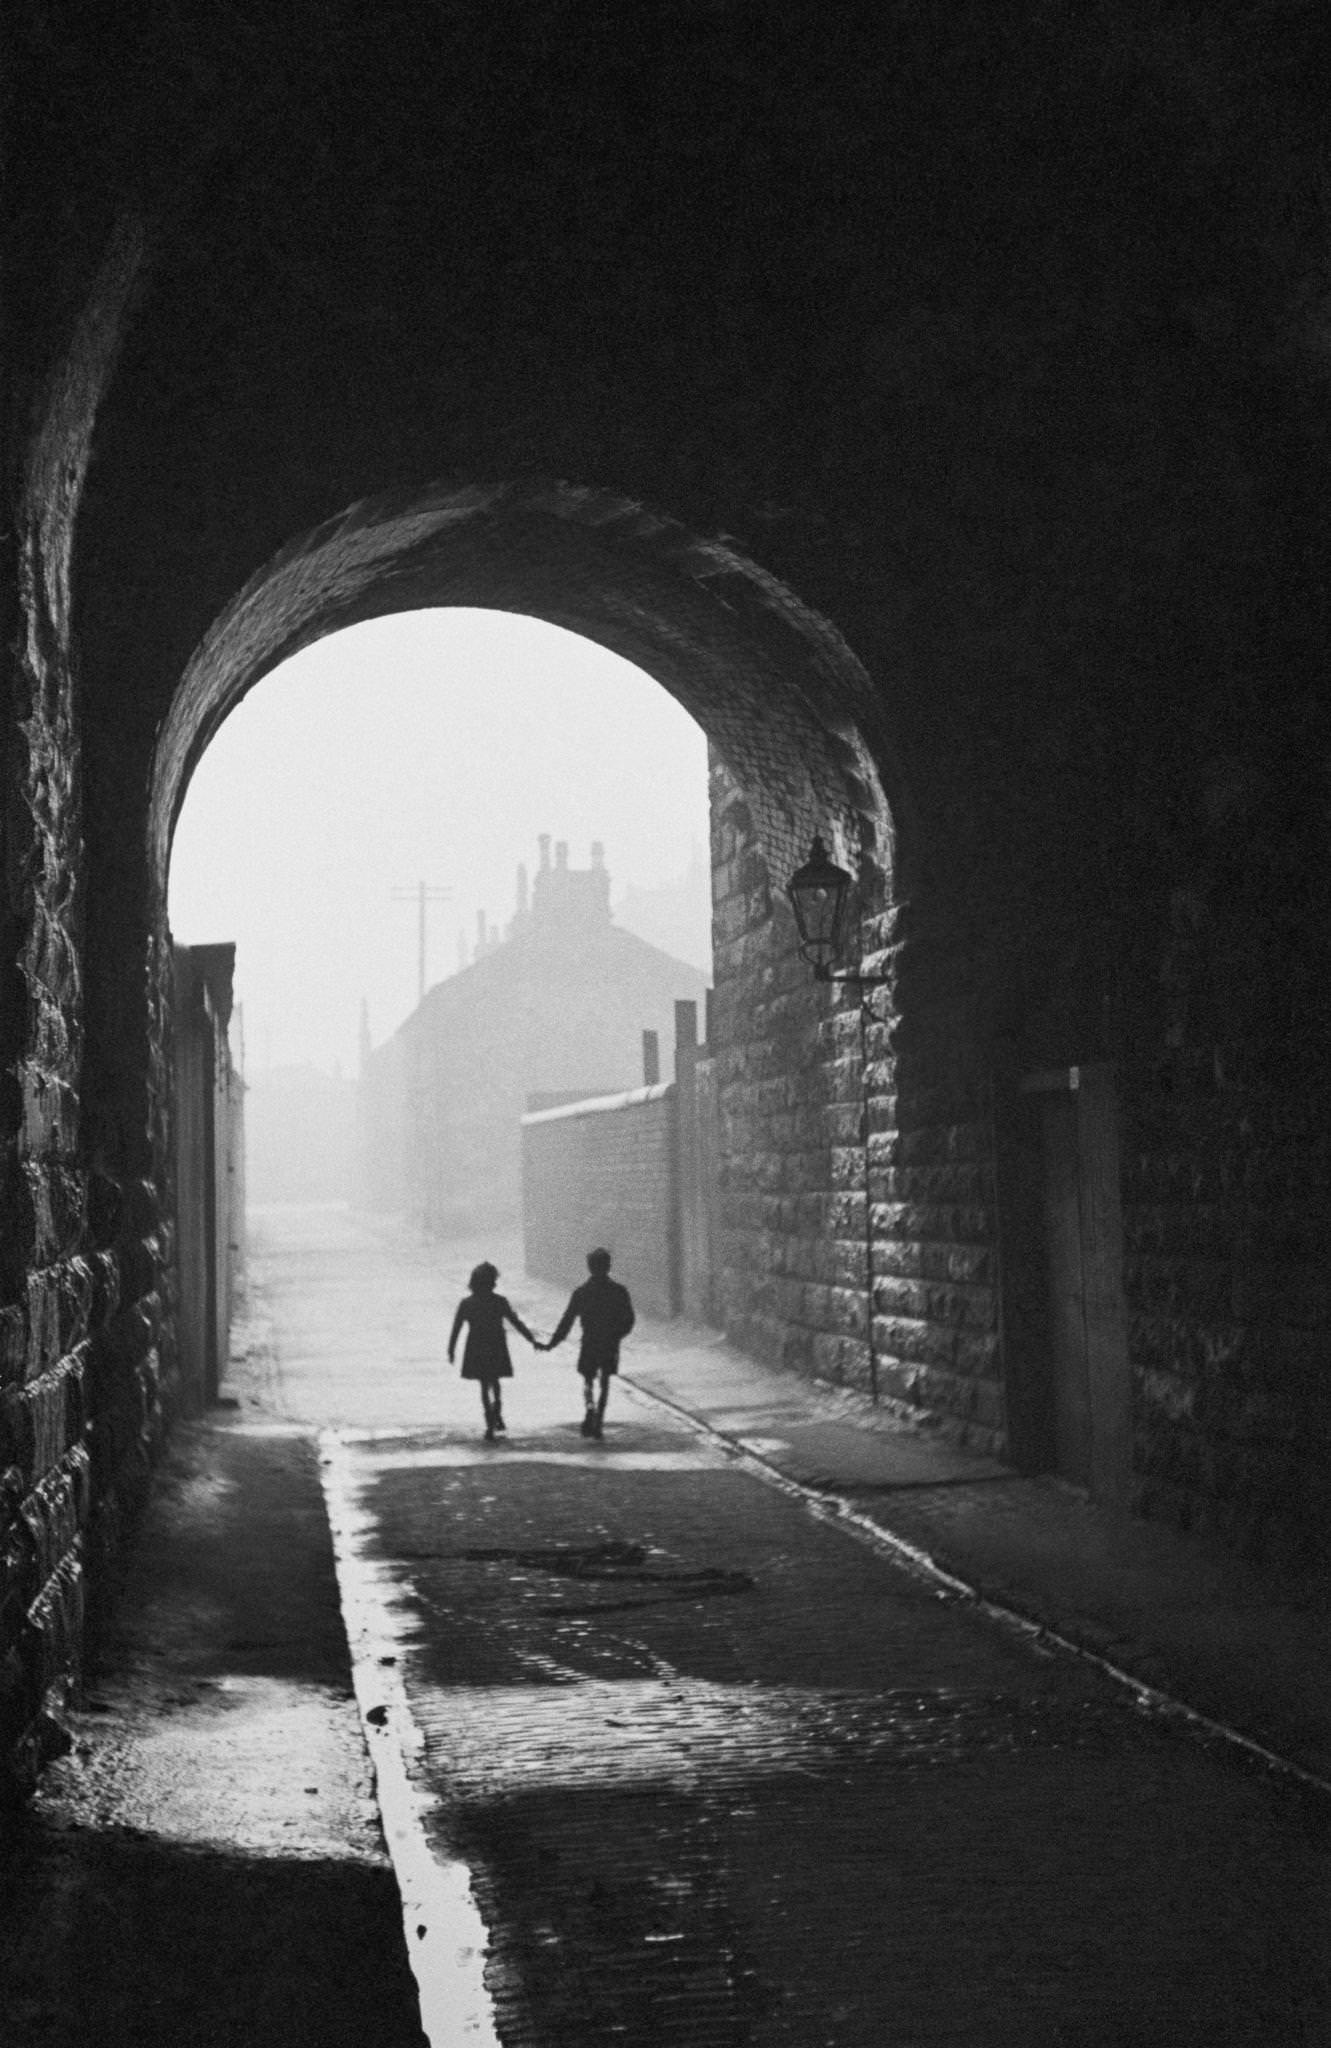 A boy and girl hold hands under an archway in the Gorbals, a slum district of Glasgow, 31st January 1948.